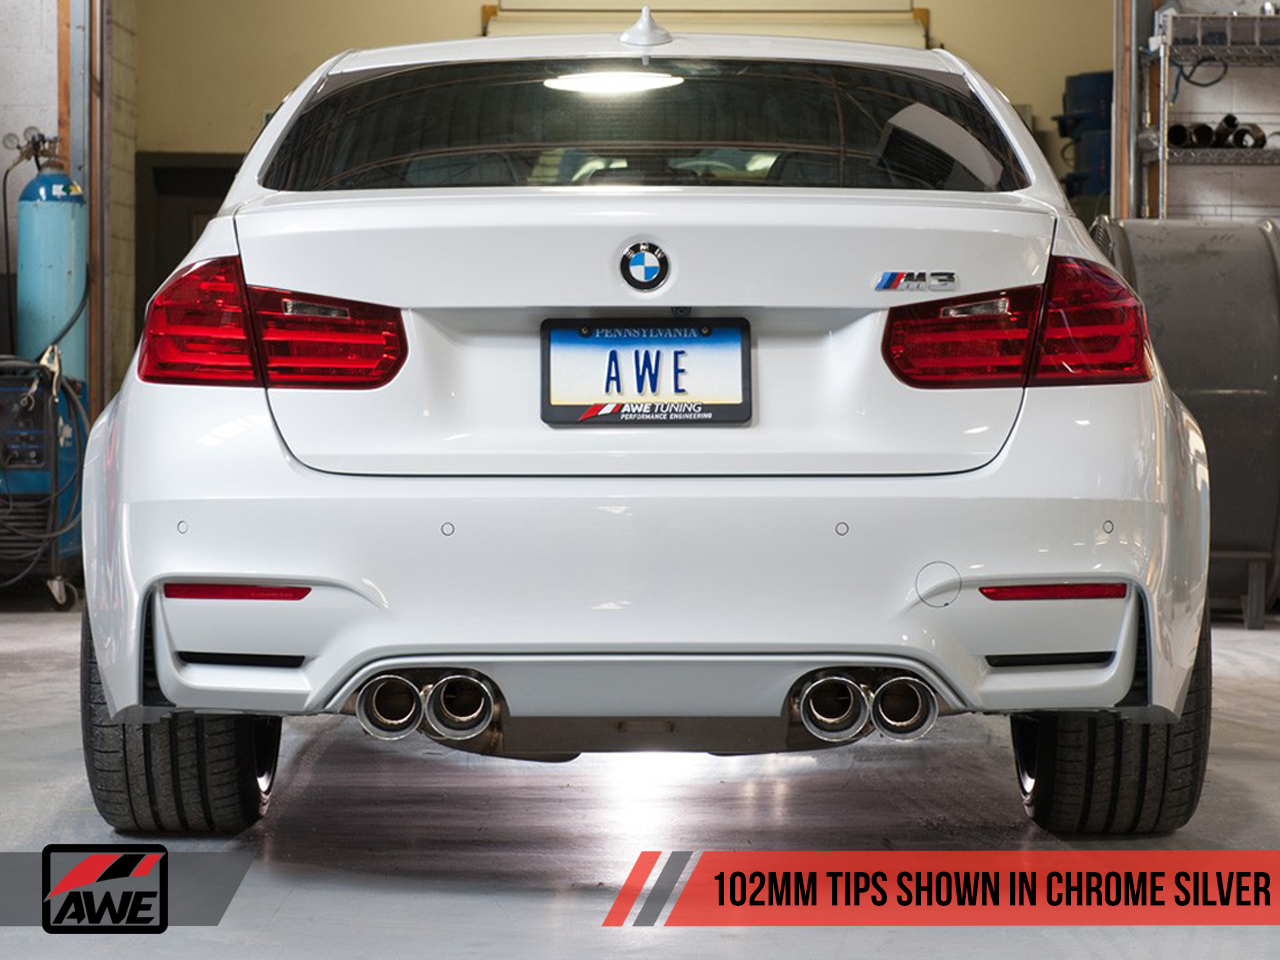 AWE Non Resonated SwitchPath™ Exhaust for BMW F8X M3 / M4 -- Chrome Silver Tips (102mm)